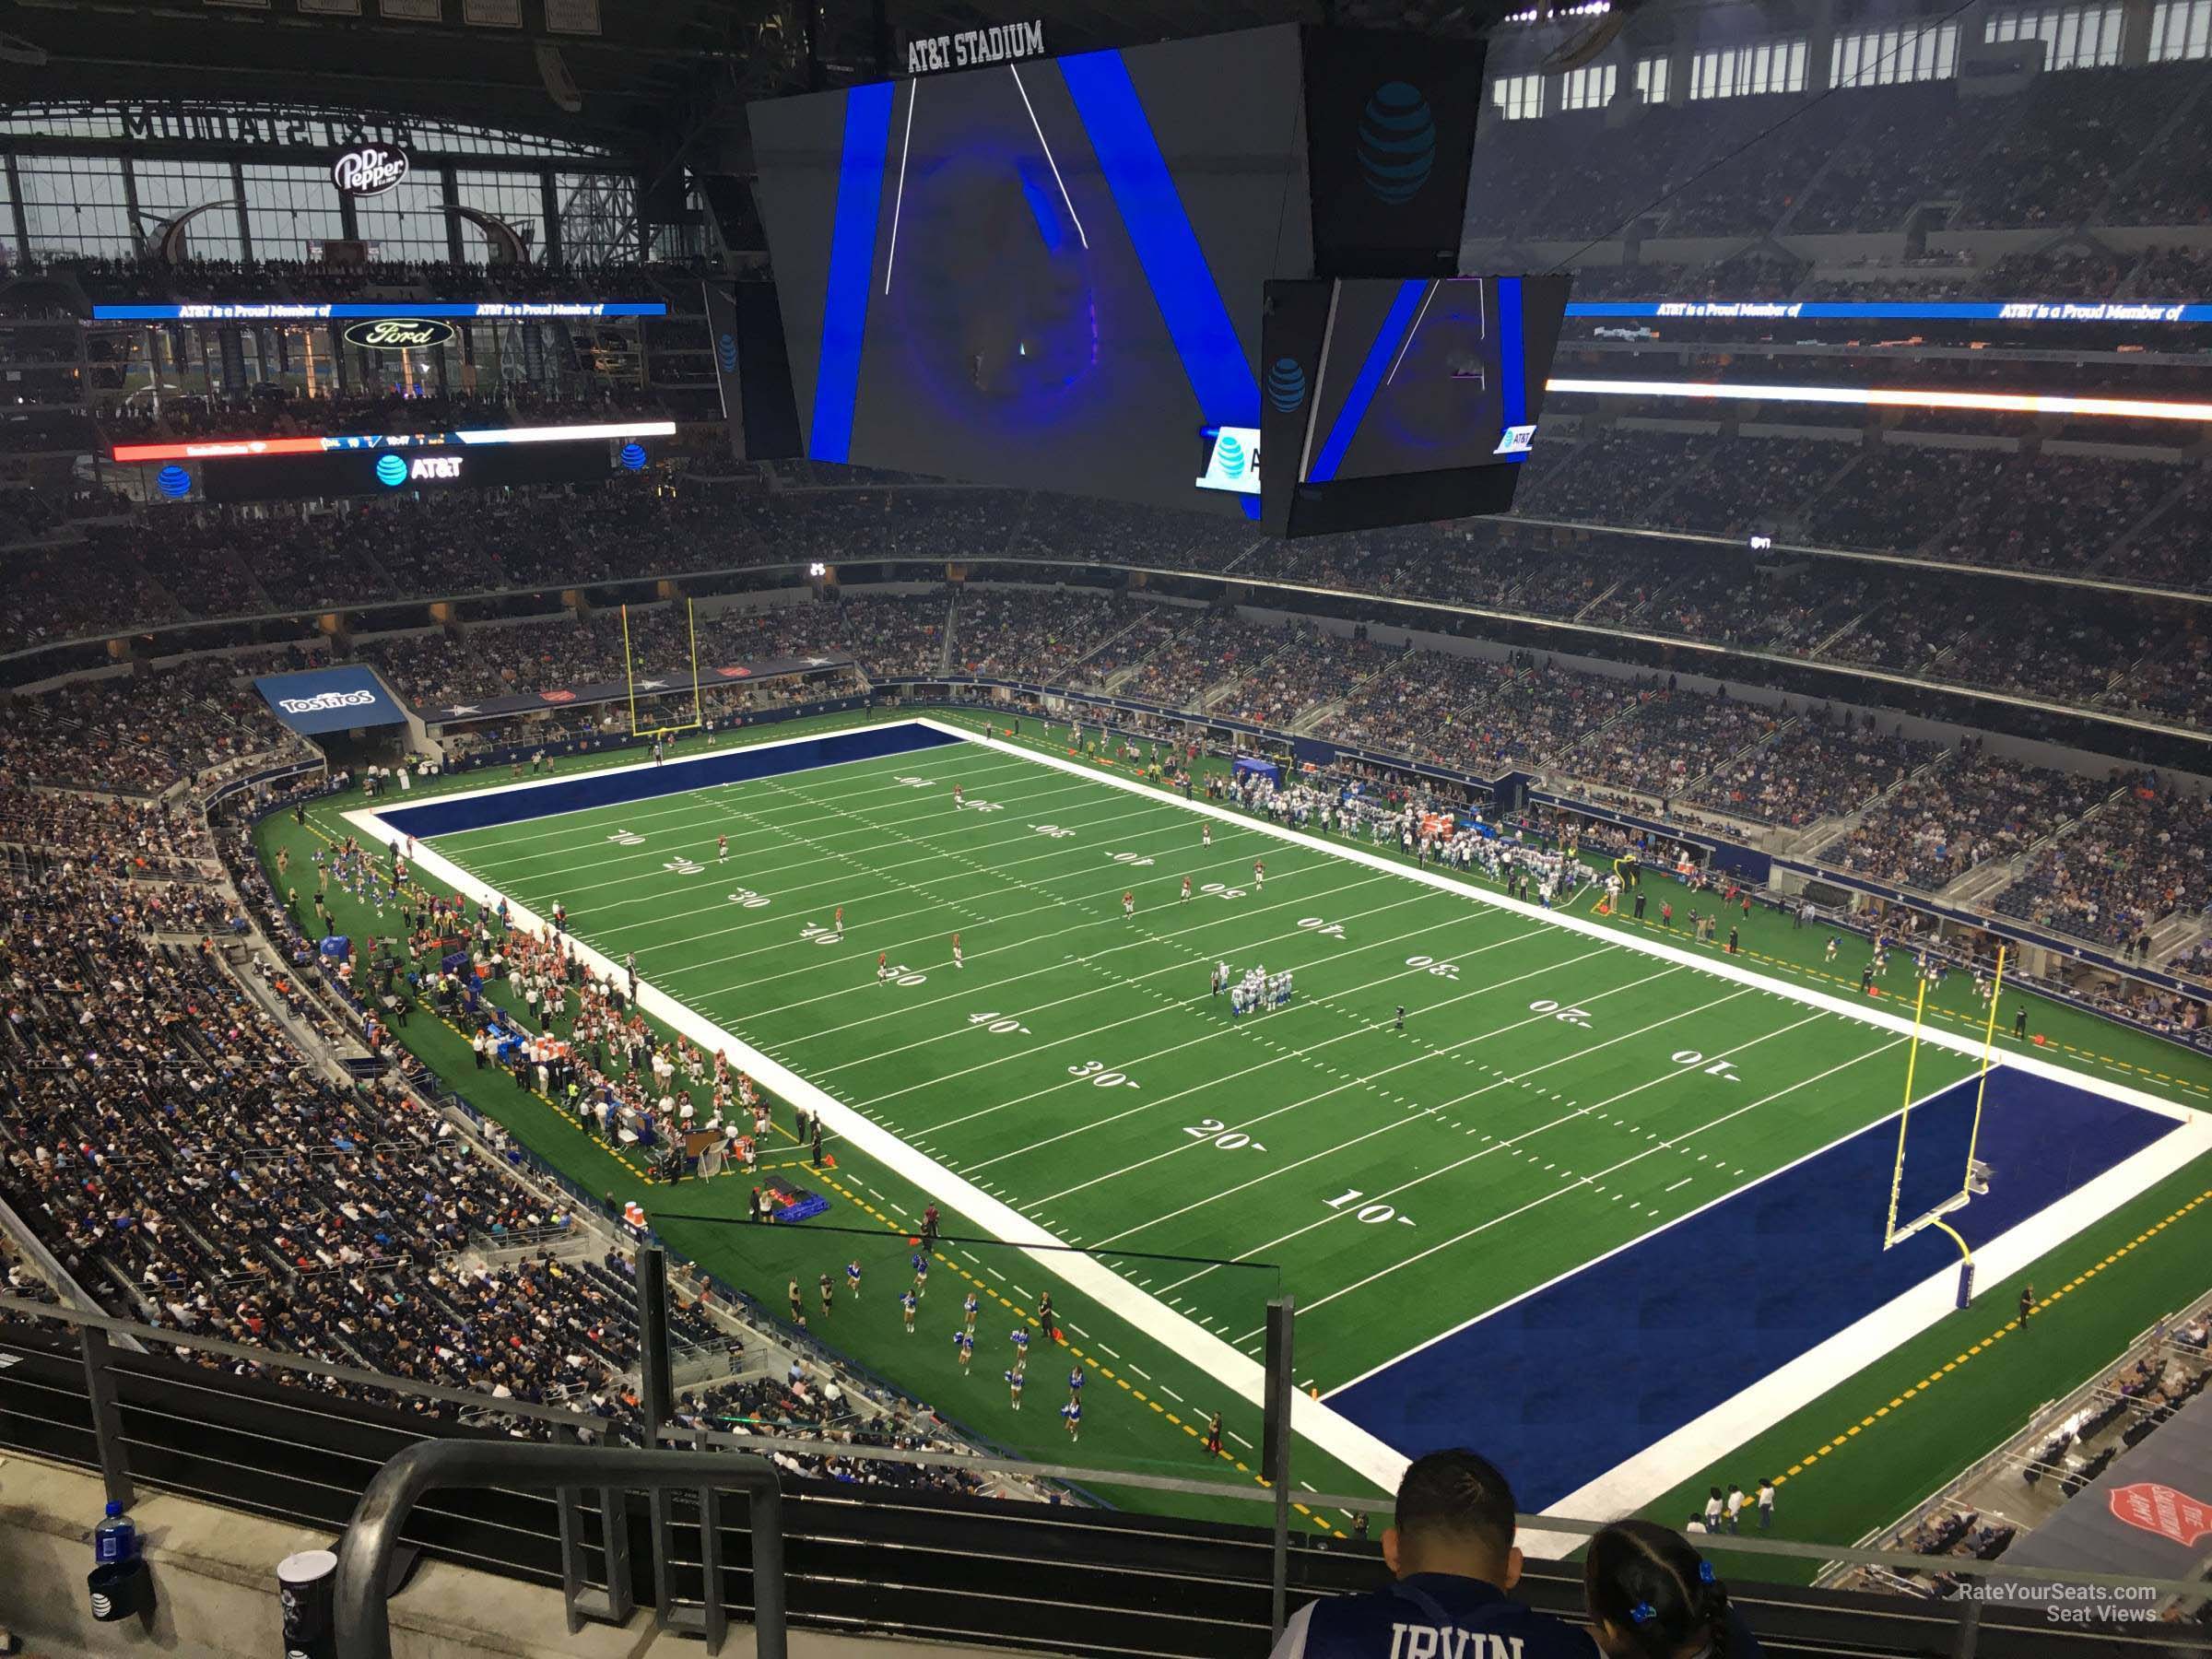 section 435, row 4 seat view  for football - at&t stadium (cowboys stadium)